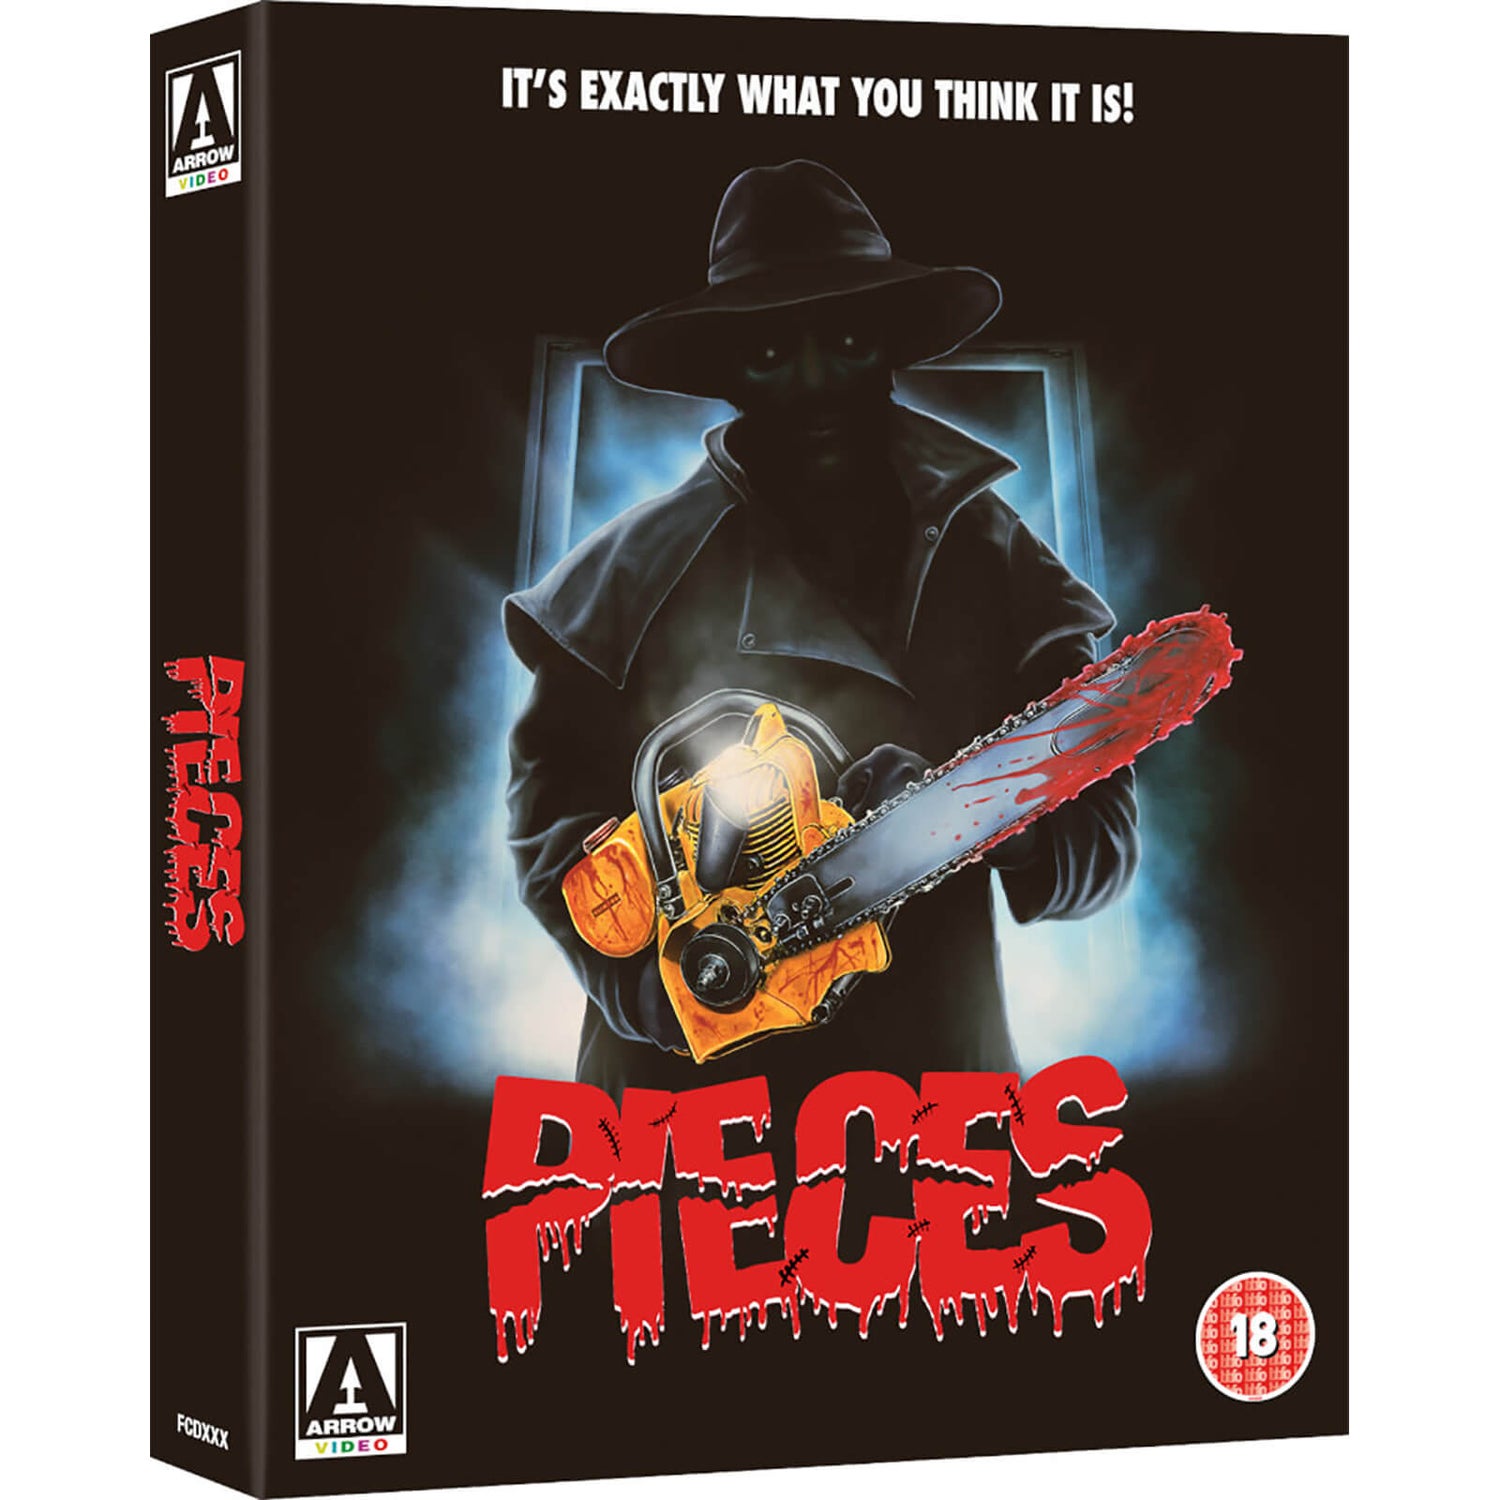 Pieces (Includes DVD/CD)